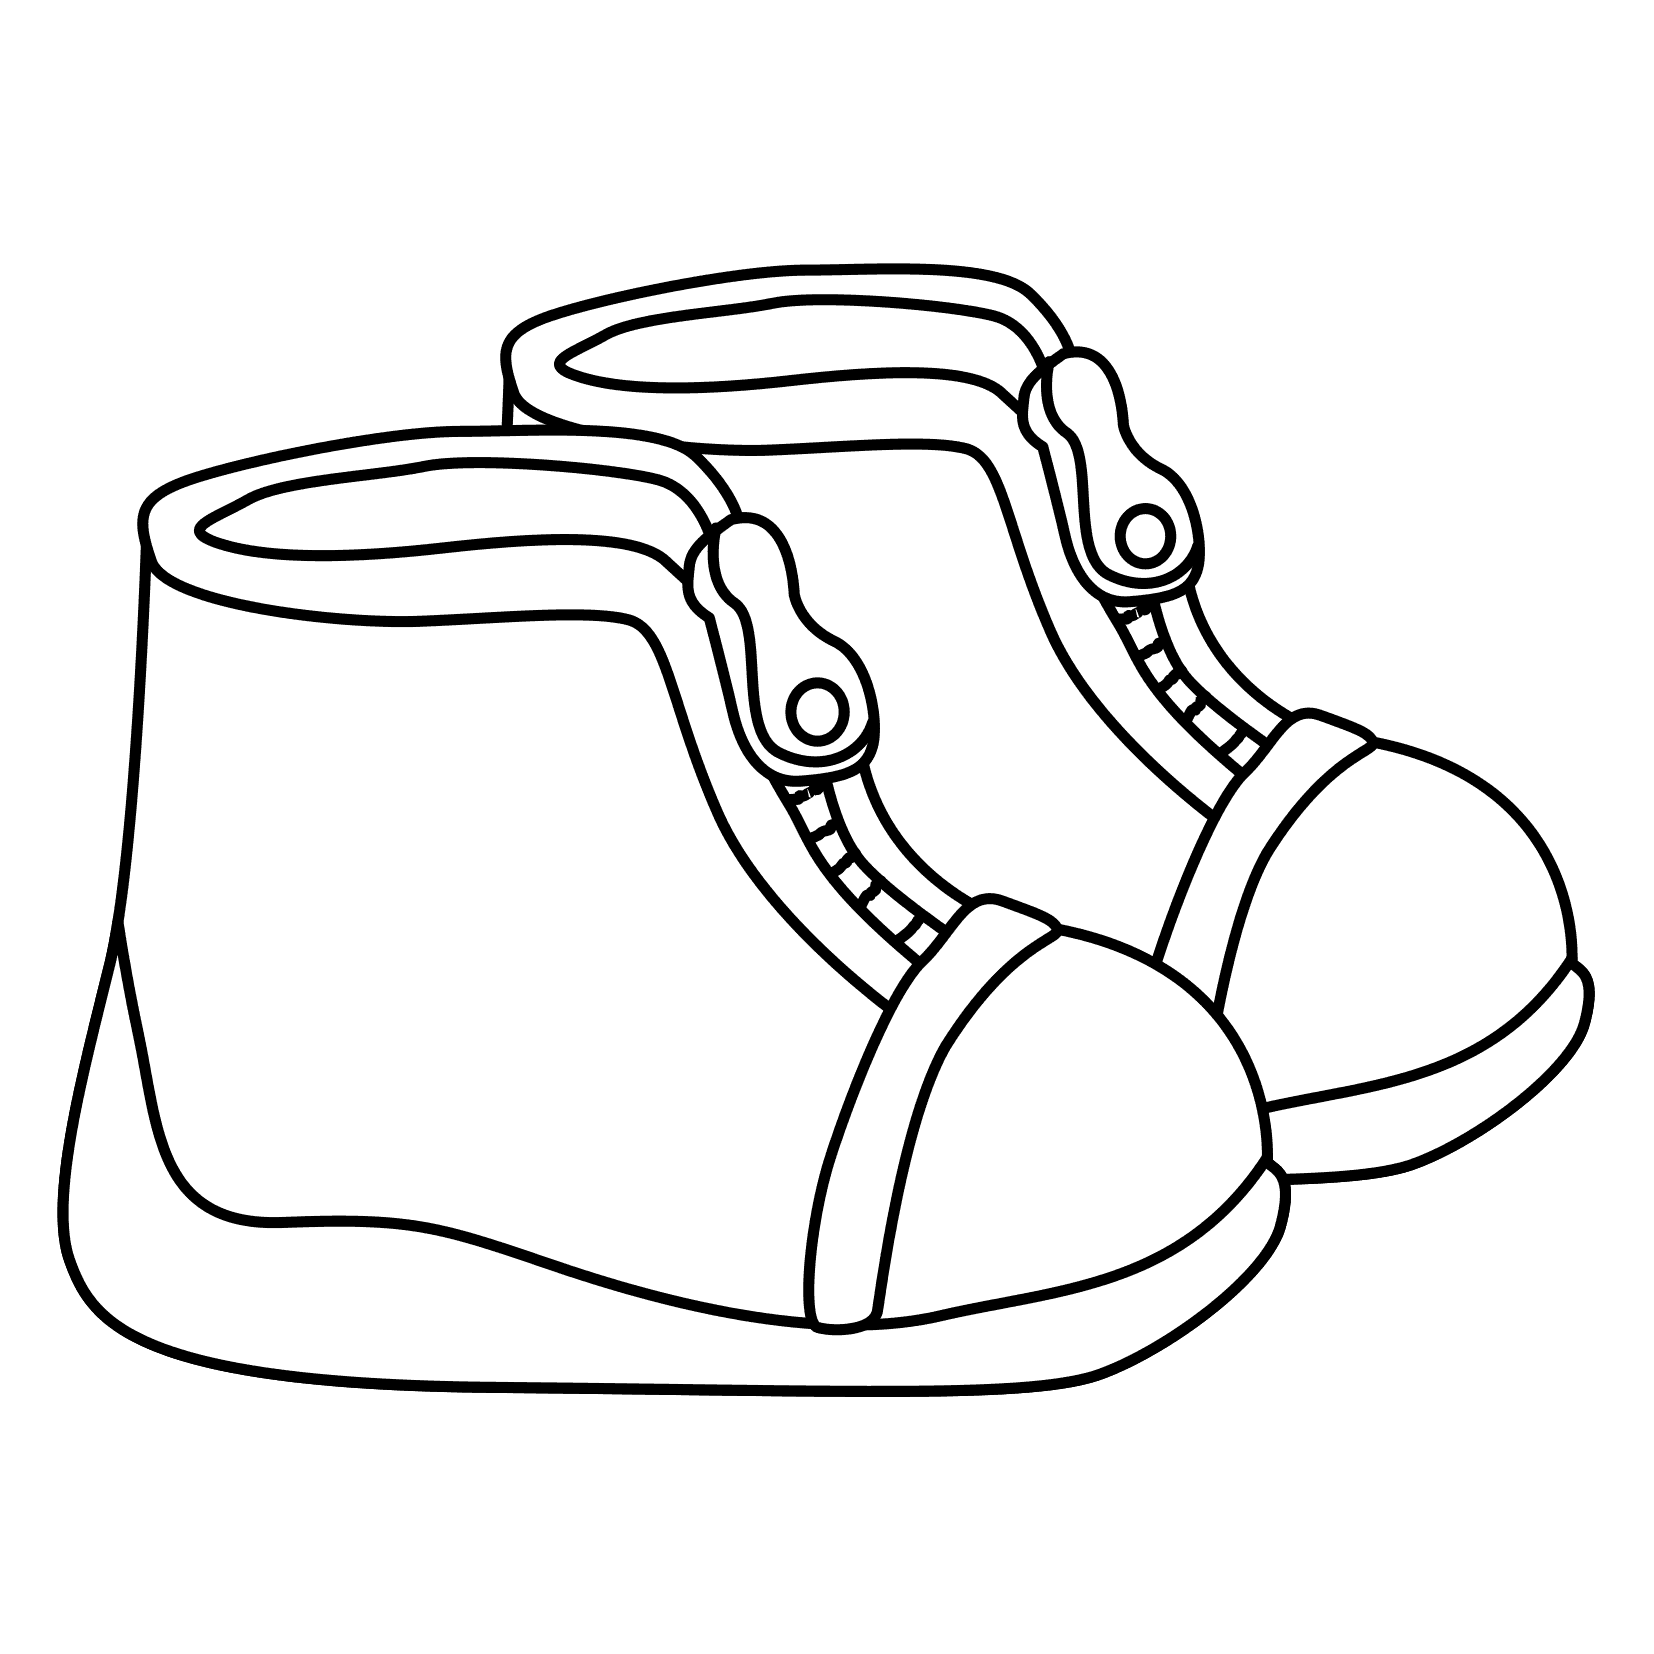 images of shoes to color shoe coloring pages to download and print for free images to shoes of color 